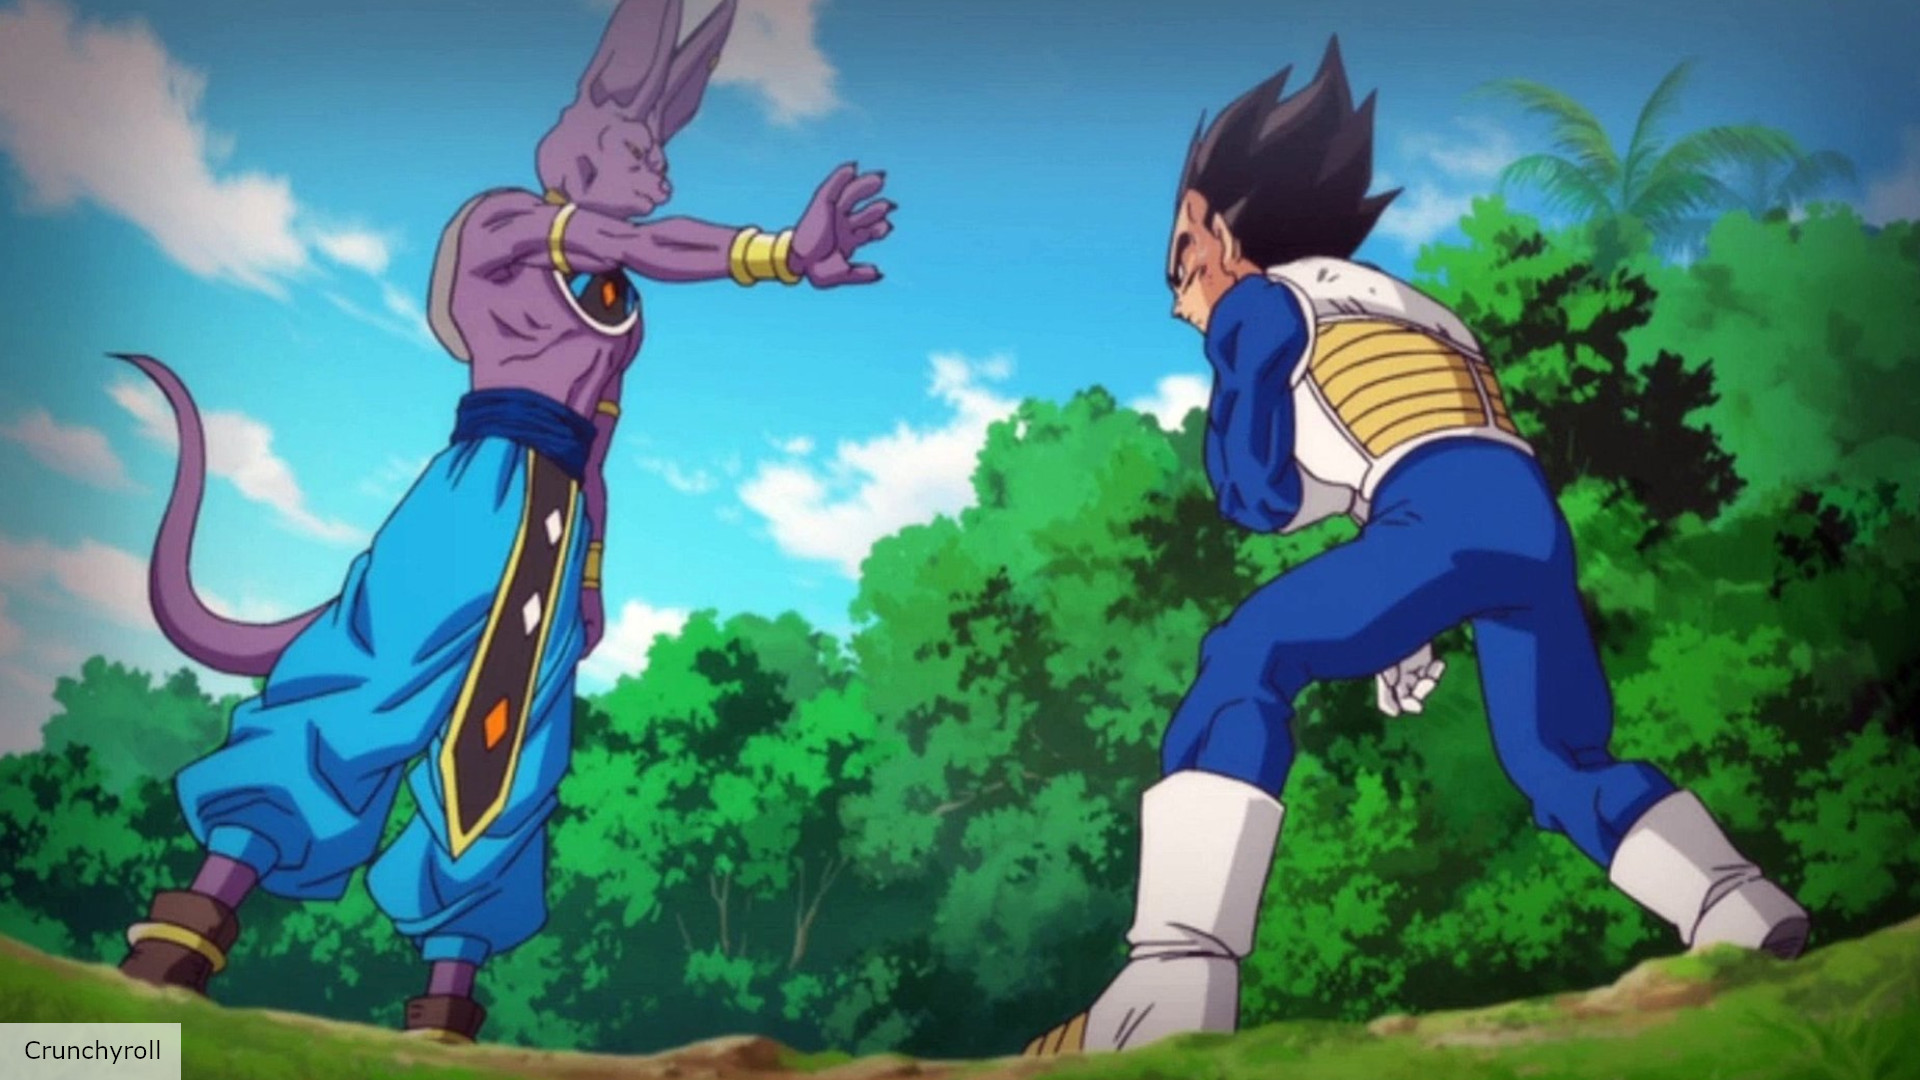 Dragon Ball Super season 2 release date speculation, cast, and news